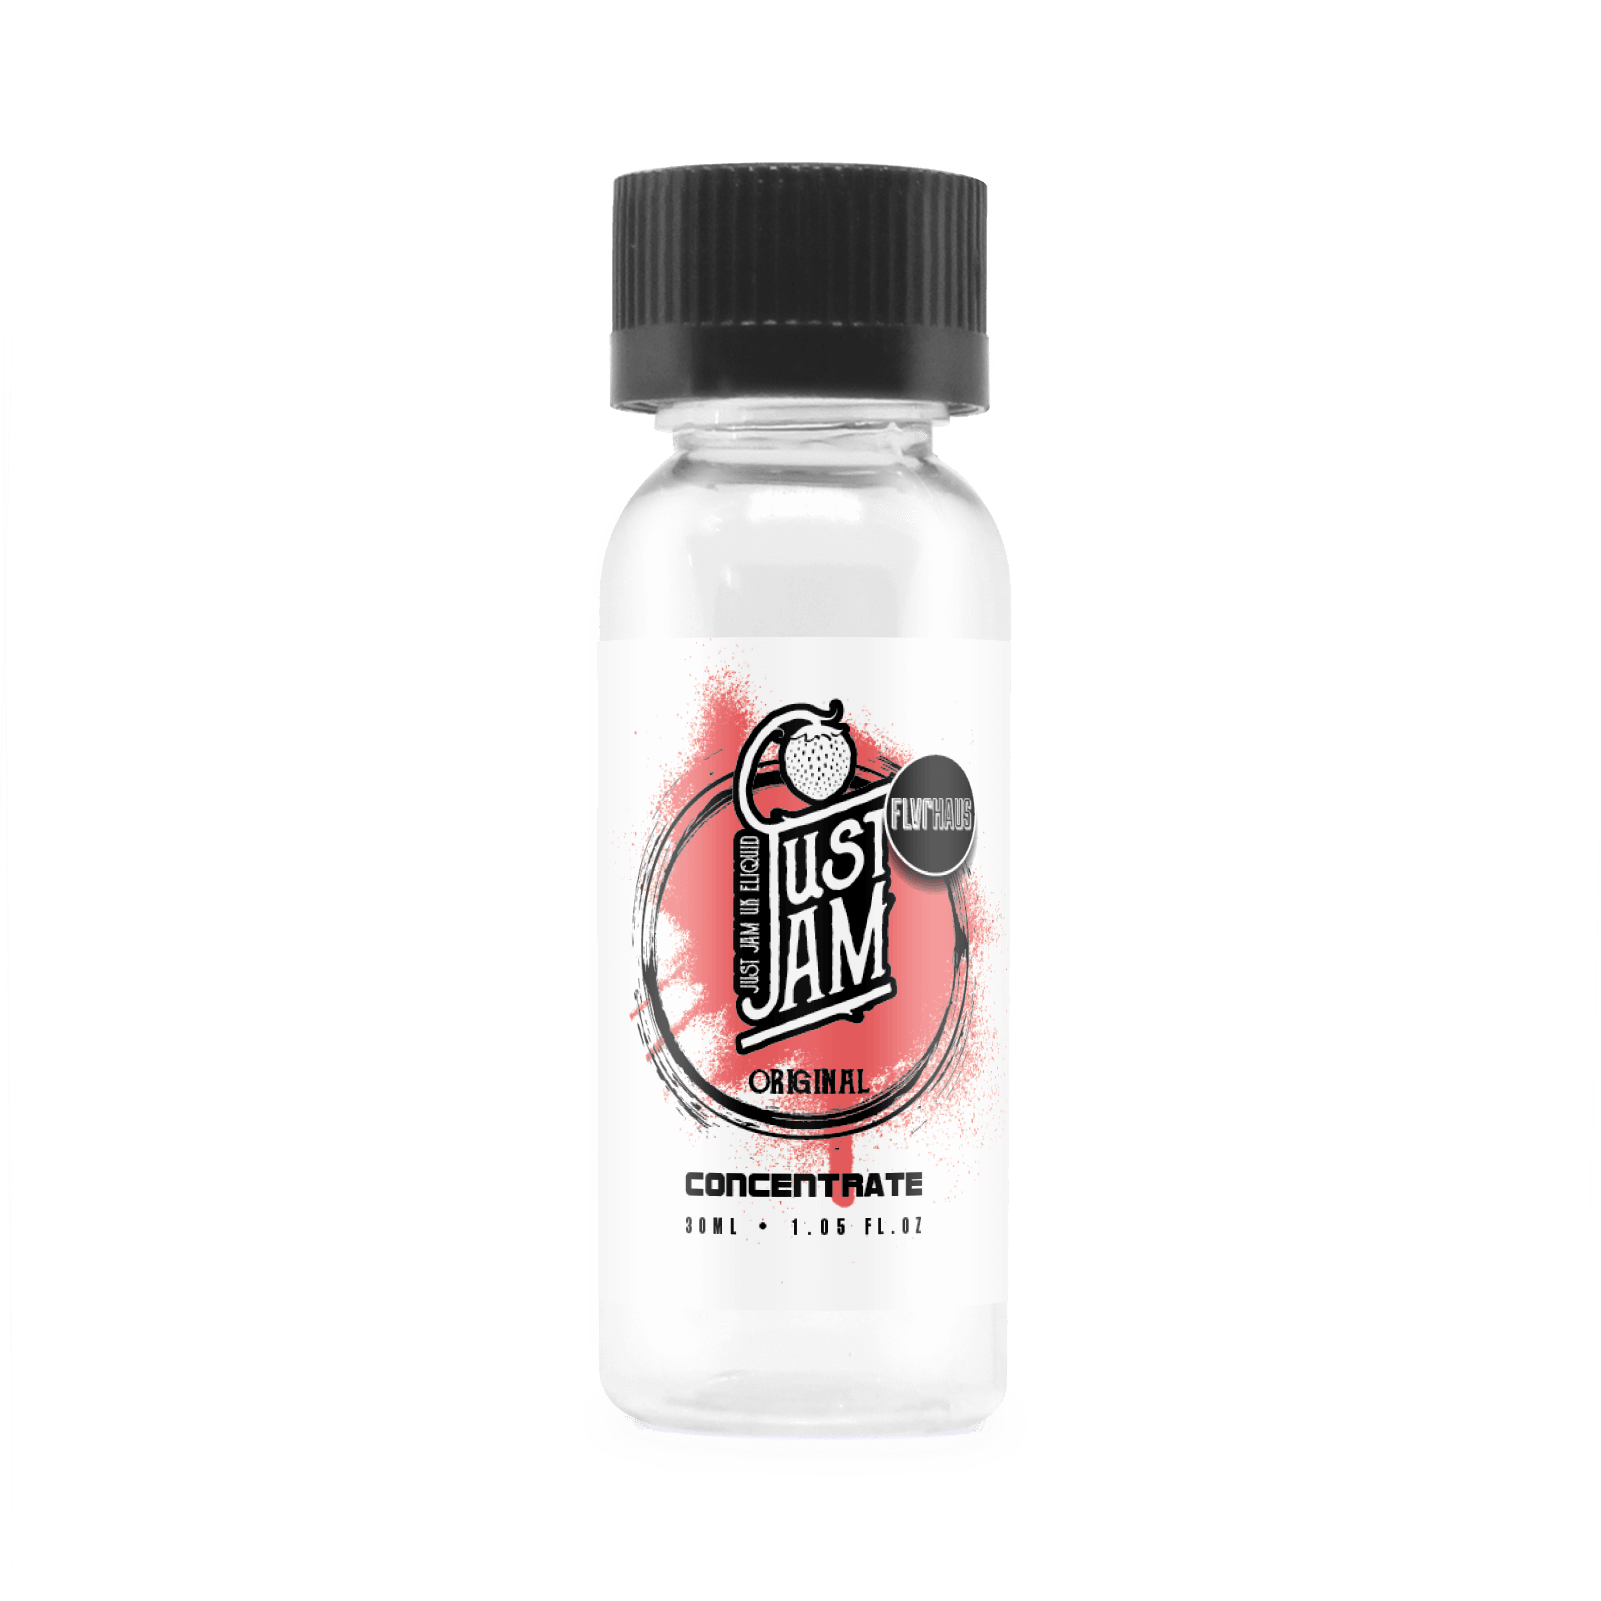 Just Jam - Original Concentrate 30ml - The Ace Of Vapez